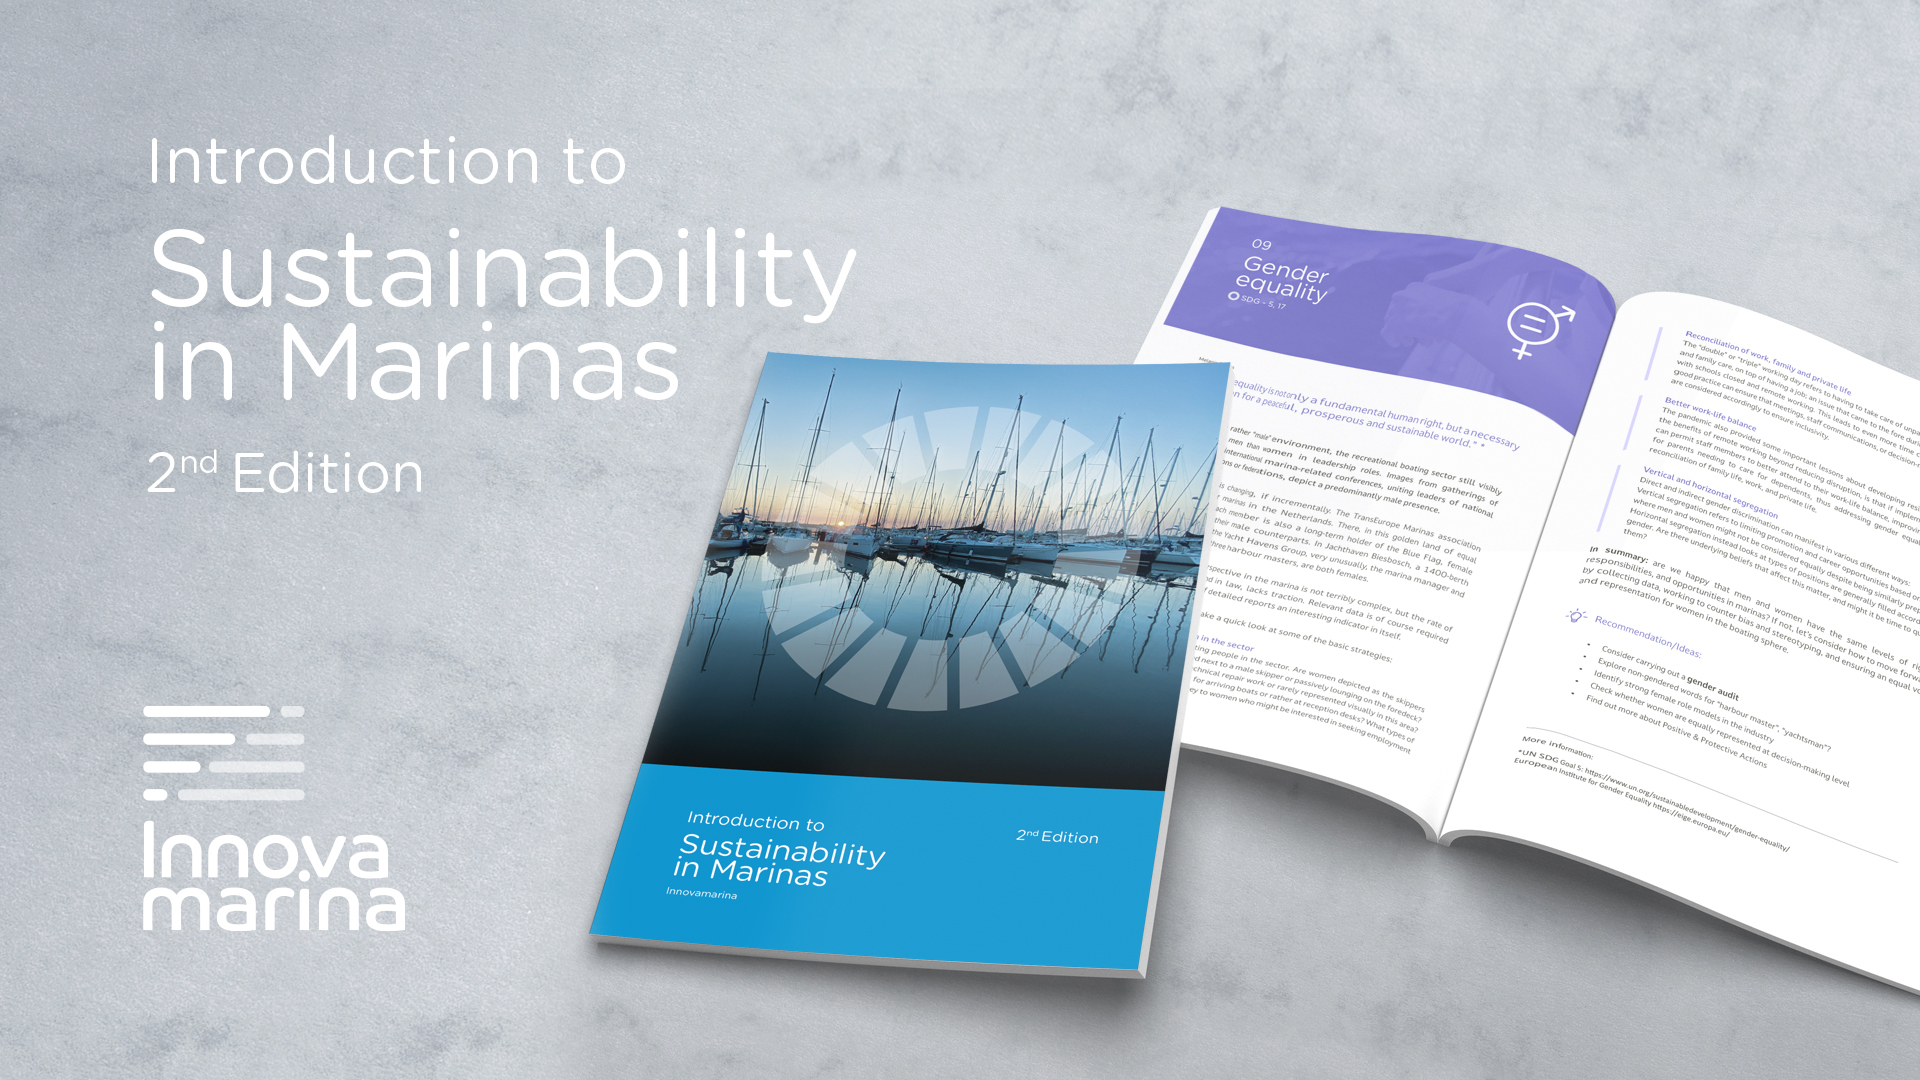 Introduction to sustainability in marinas - 2nd Edition